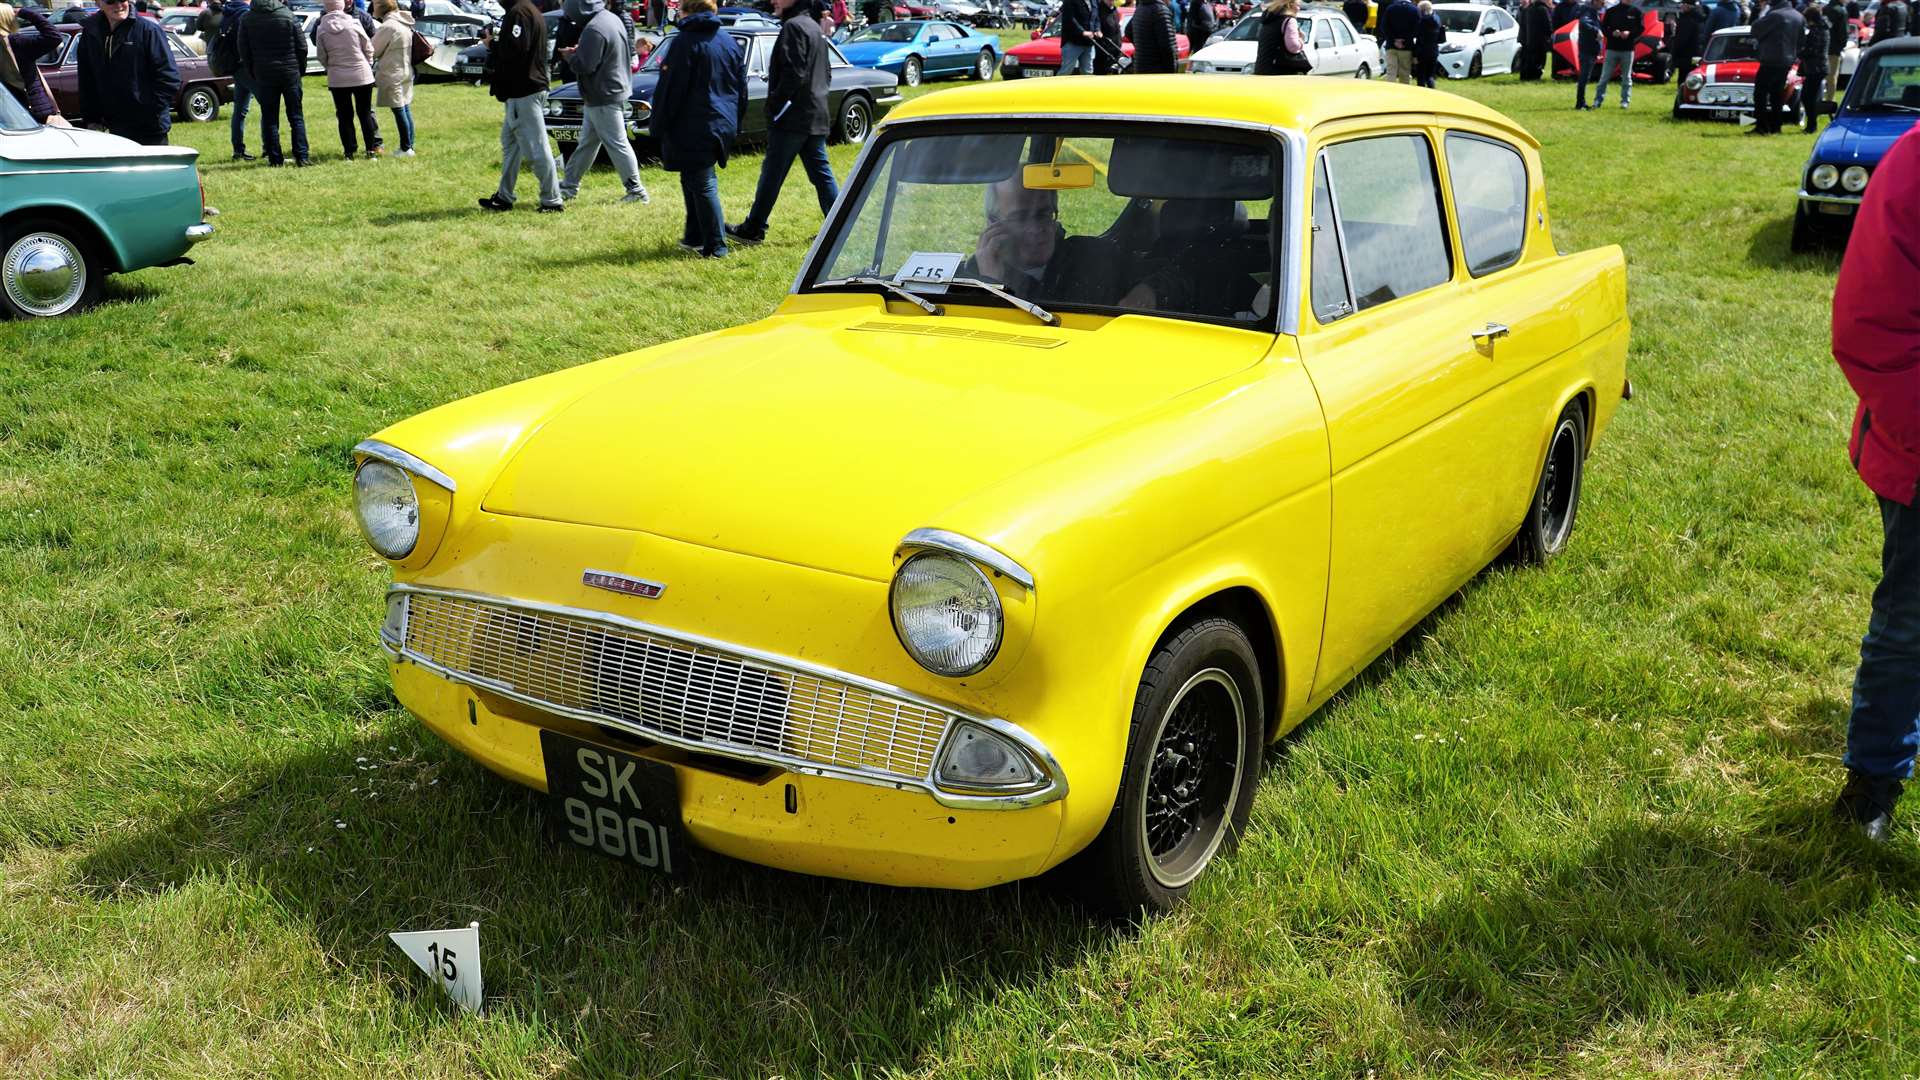 1963 Ford Anglia owned by Nick Manson from Thurso. Picture: DGS